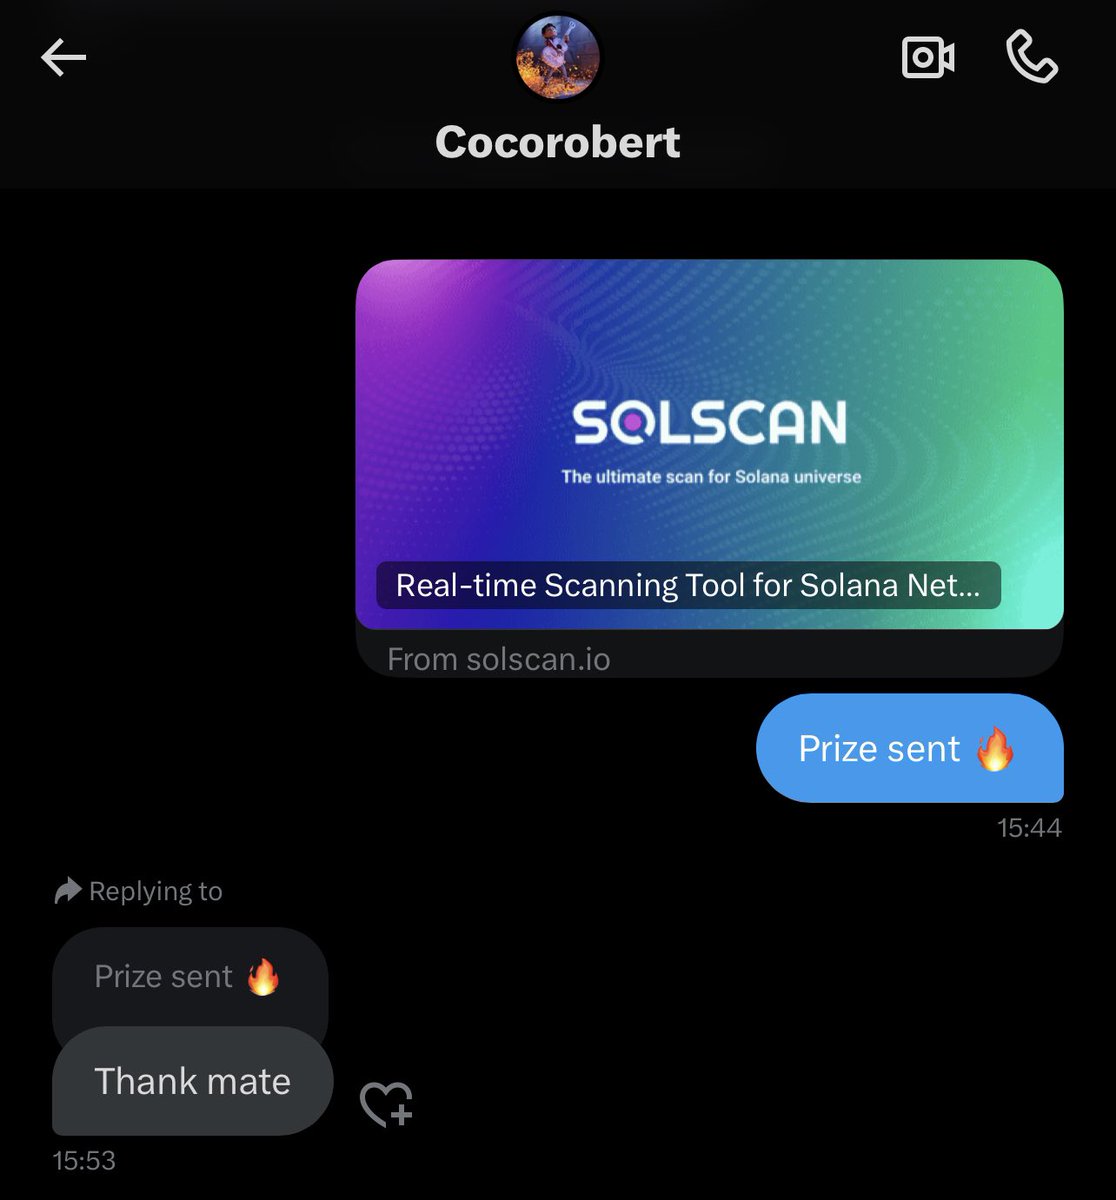 Another day, another winners 🤝

To be next:
- RT and Like
- Drop SOL wallet